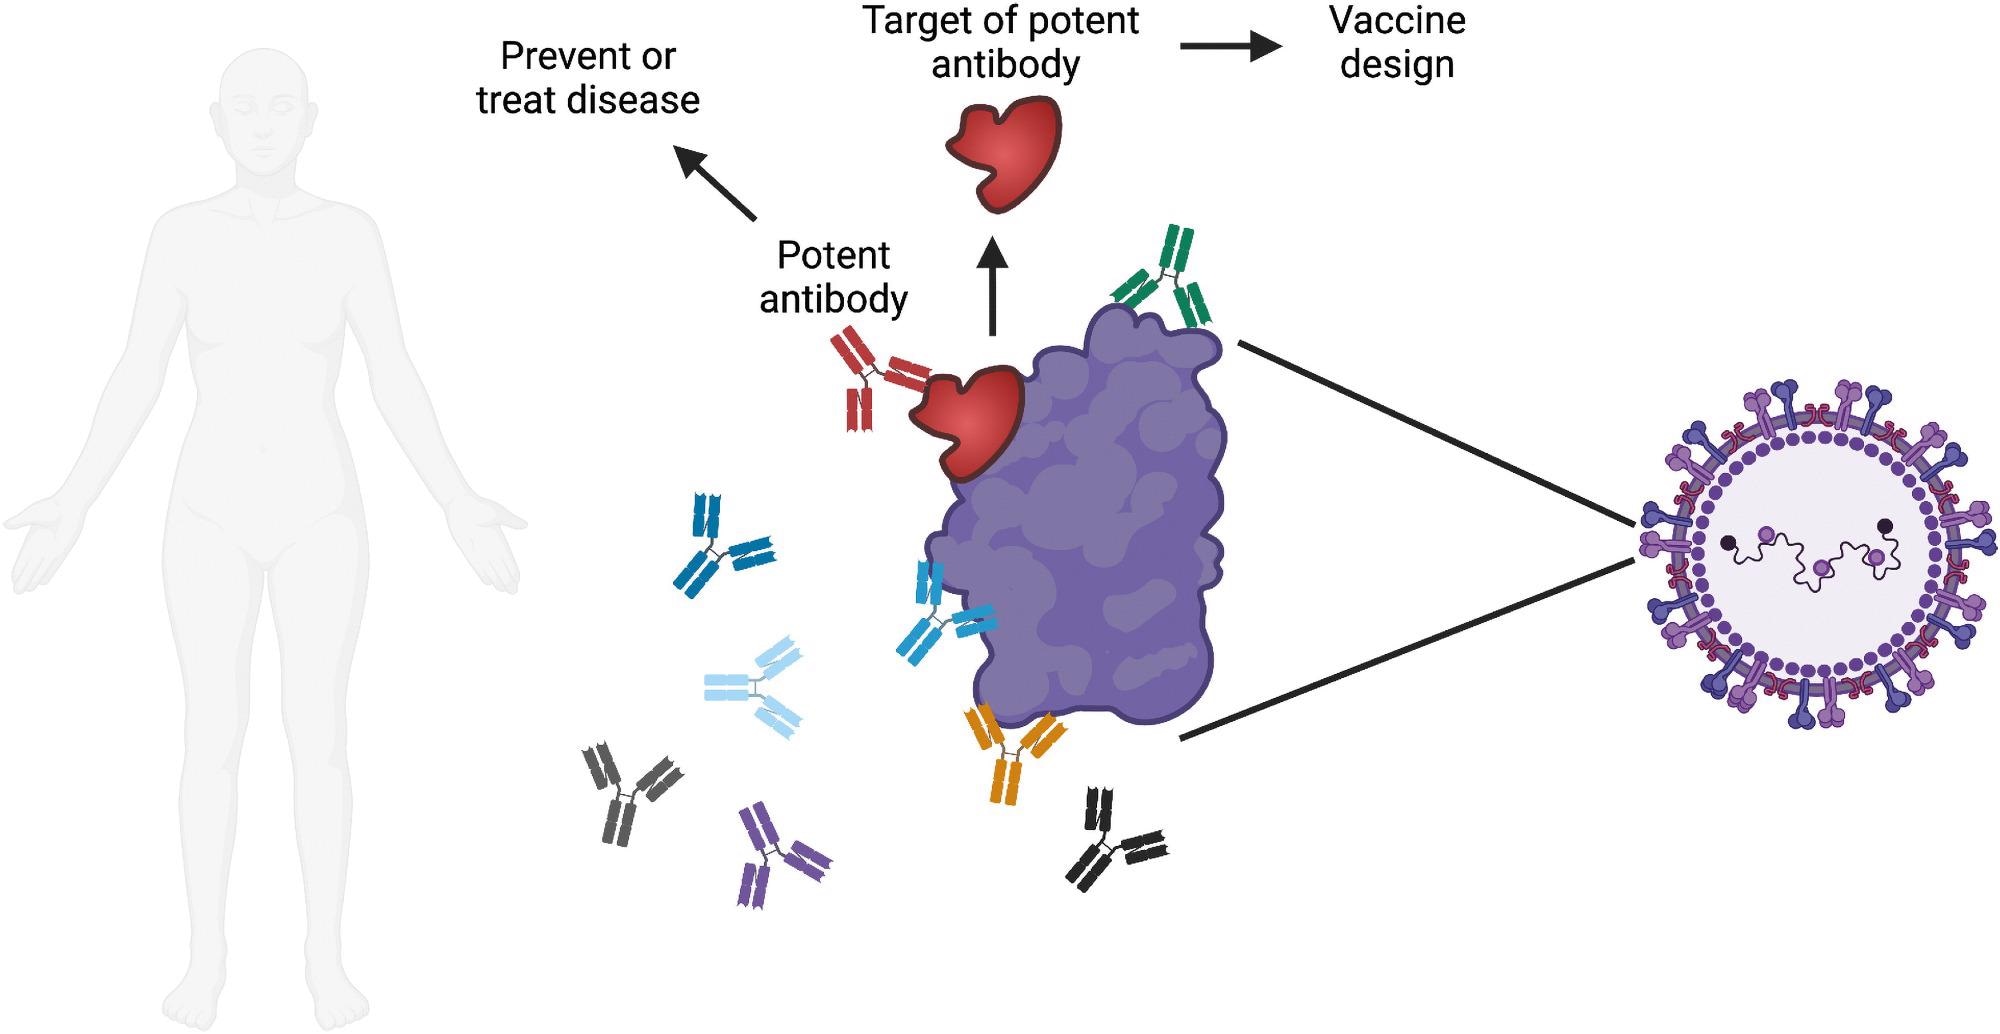 Overview of monoclonal antibody research. Each person makes many different antibodies in response to infection or vaccination. One major goal of monoclonal antibody research is to identify the most potent antibodies against a specific pathogen of interest. Potent antibodies can be tested for the ability to prevent or treat disease in humans. The site on the pathogen that is bound by the potent antibody can be evaluated for use in a vaccine, with the goal of triggering the production of these potent antibodies when the vaccine is administered. Image created with Biorender.com.